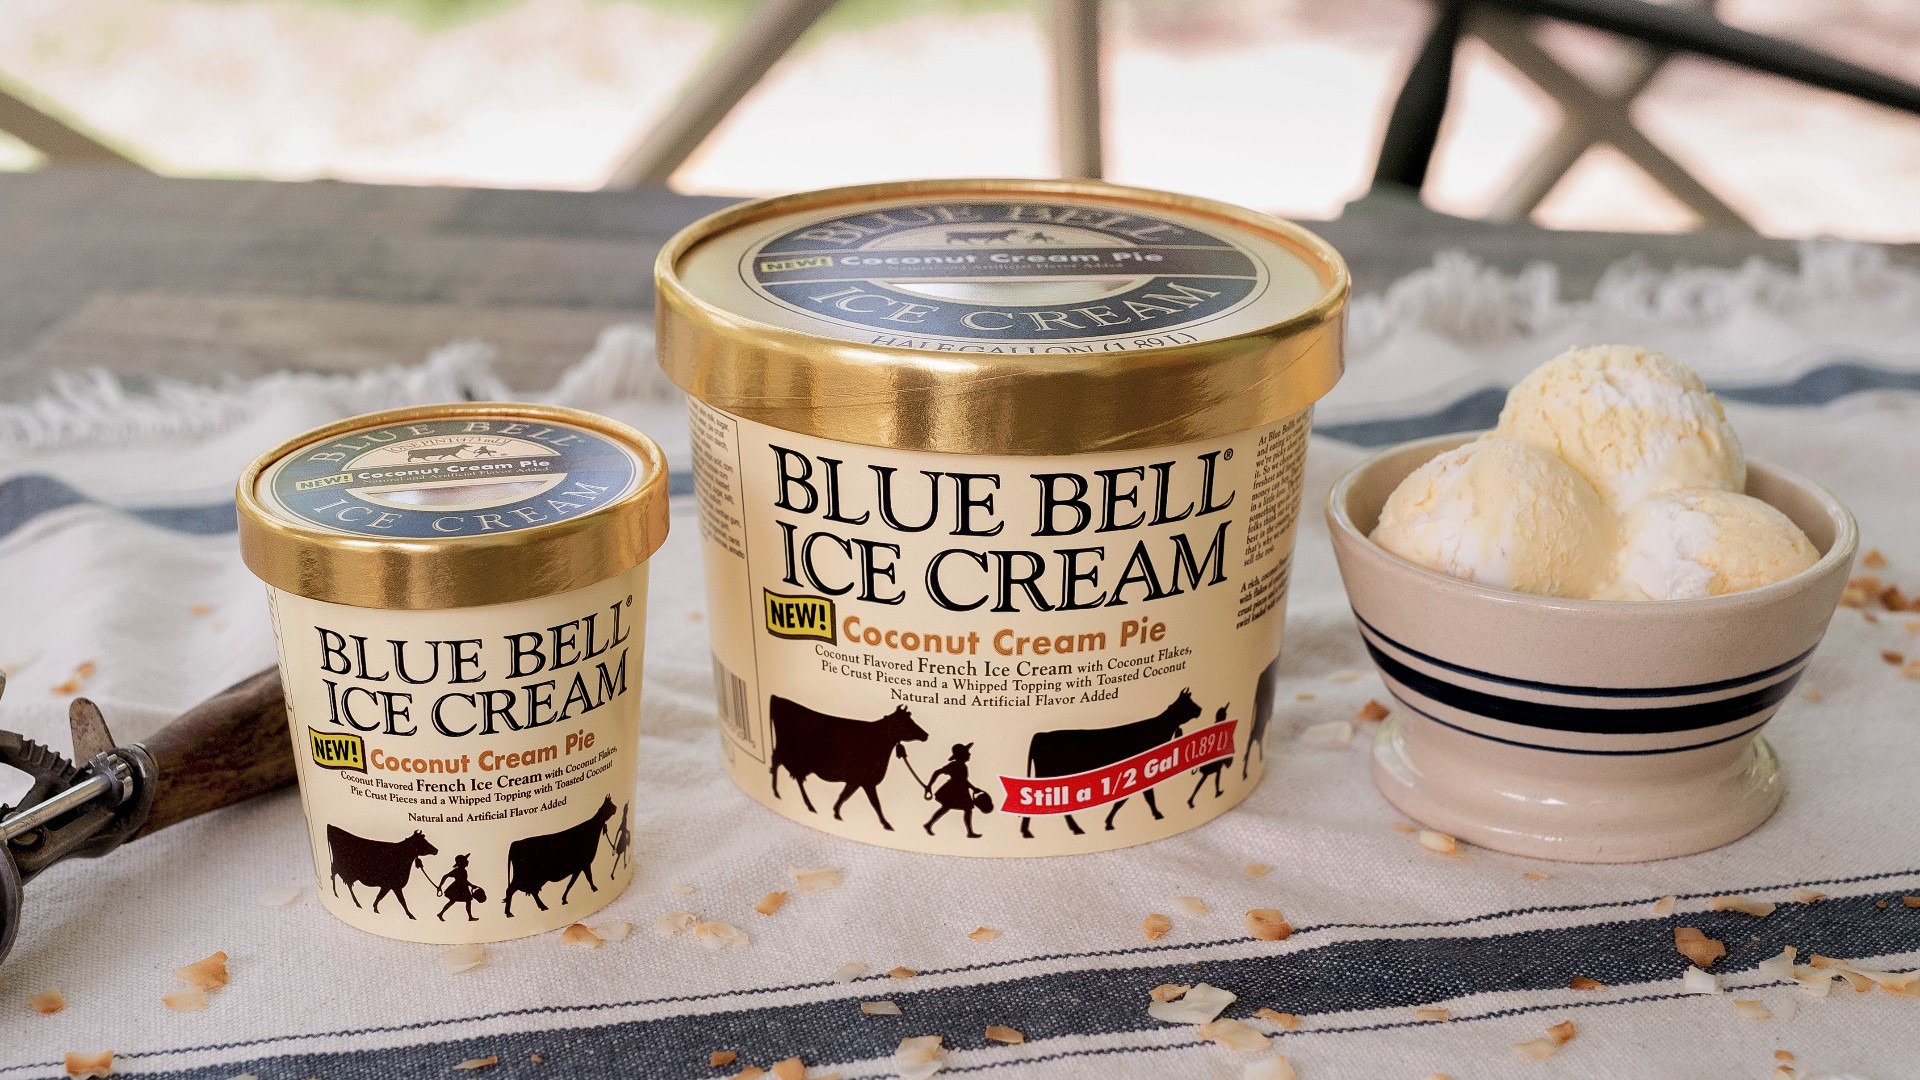 Blue Bell introduces new ice cream flavor